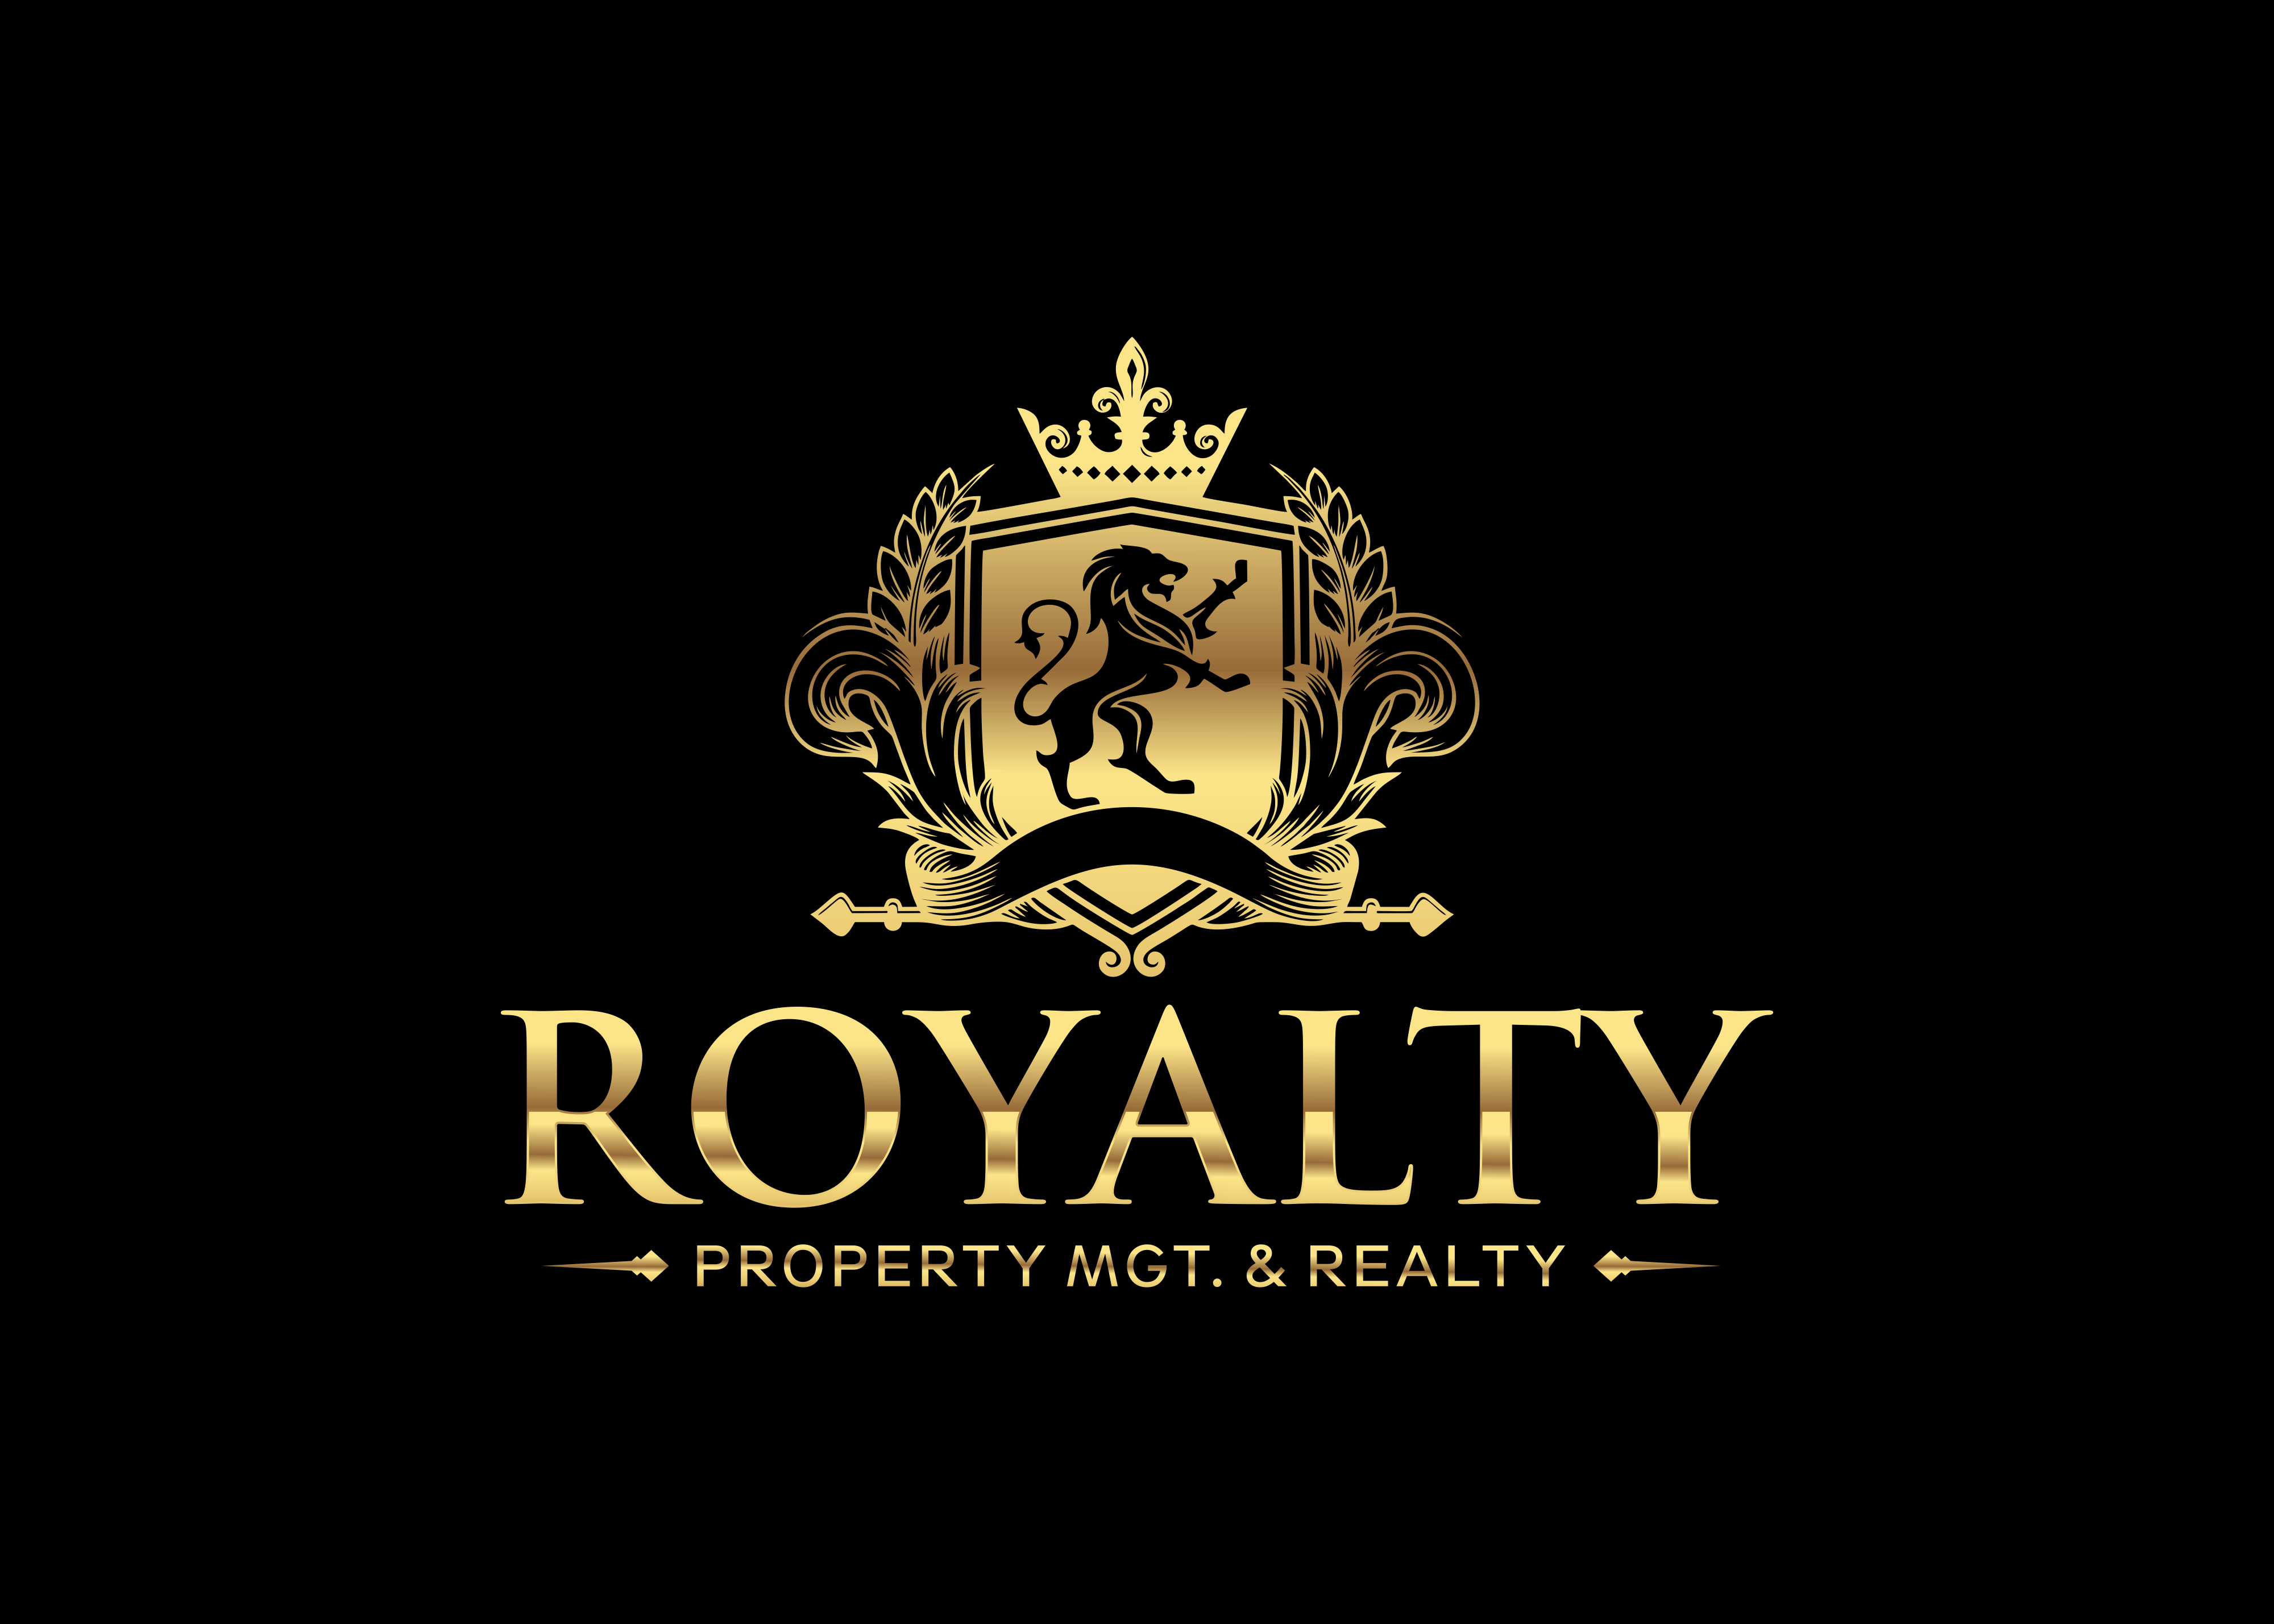 Royalty Property Management & Realty